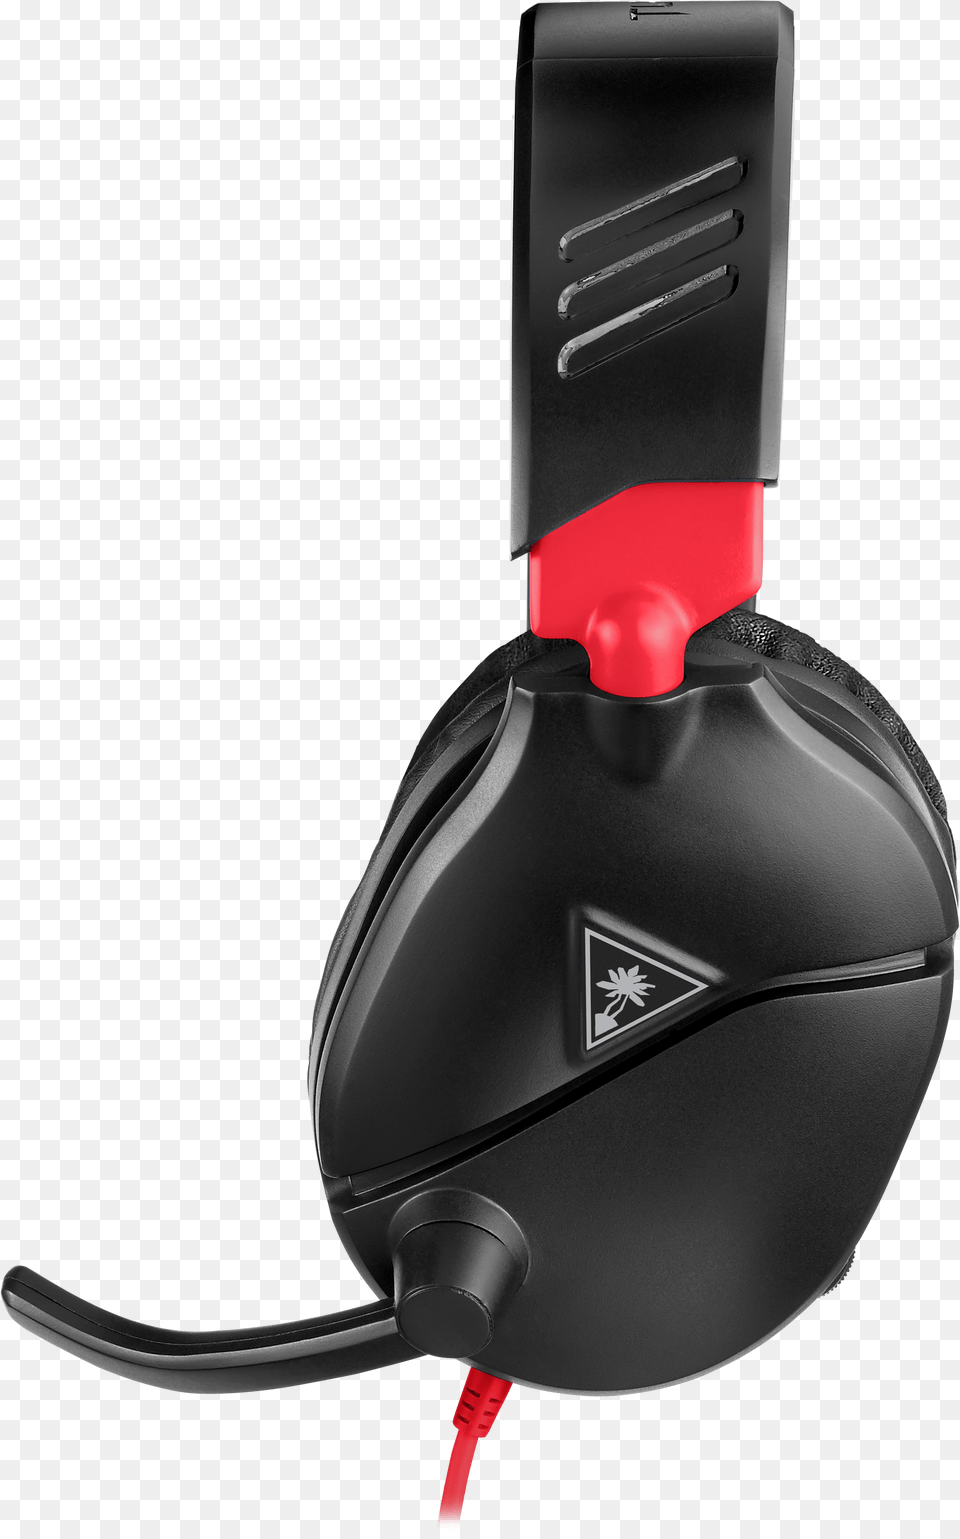 Transparent Nintendo Switch Turtle Beach Recon, Computer Hardware, Electronics, Hardware, Mouse Png Image